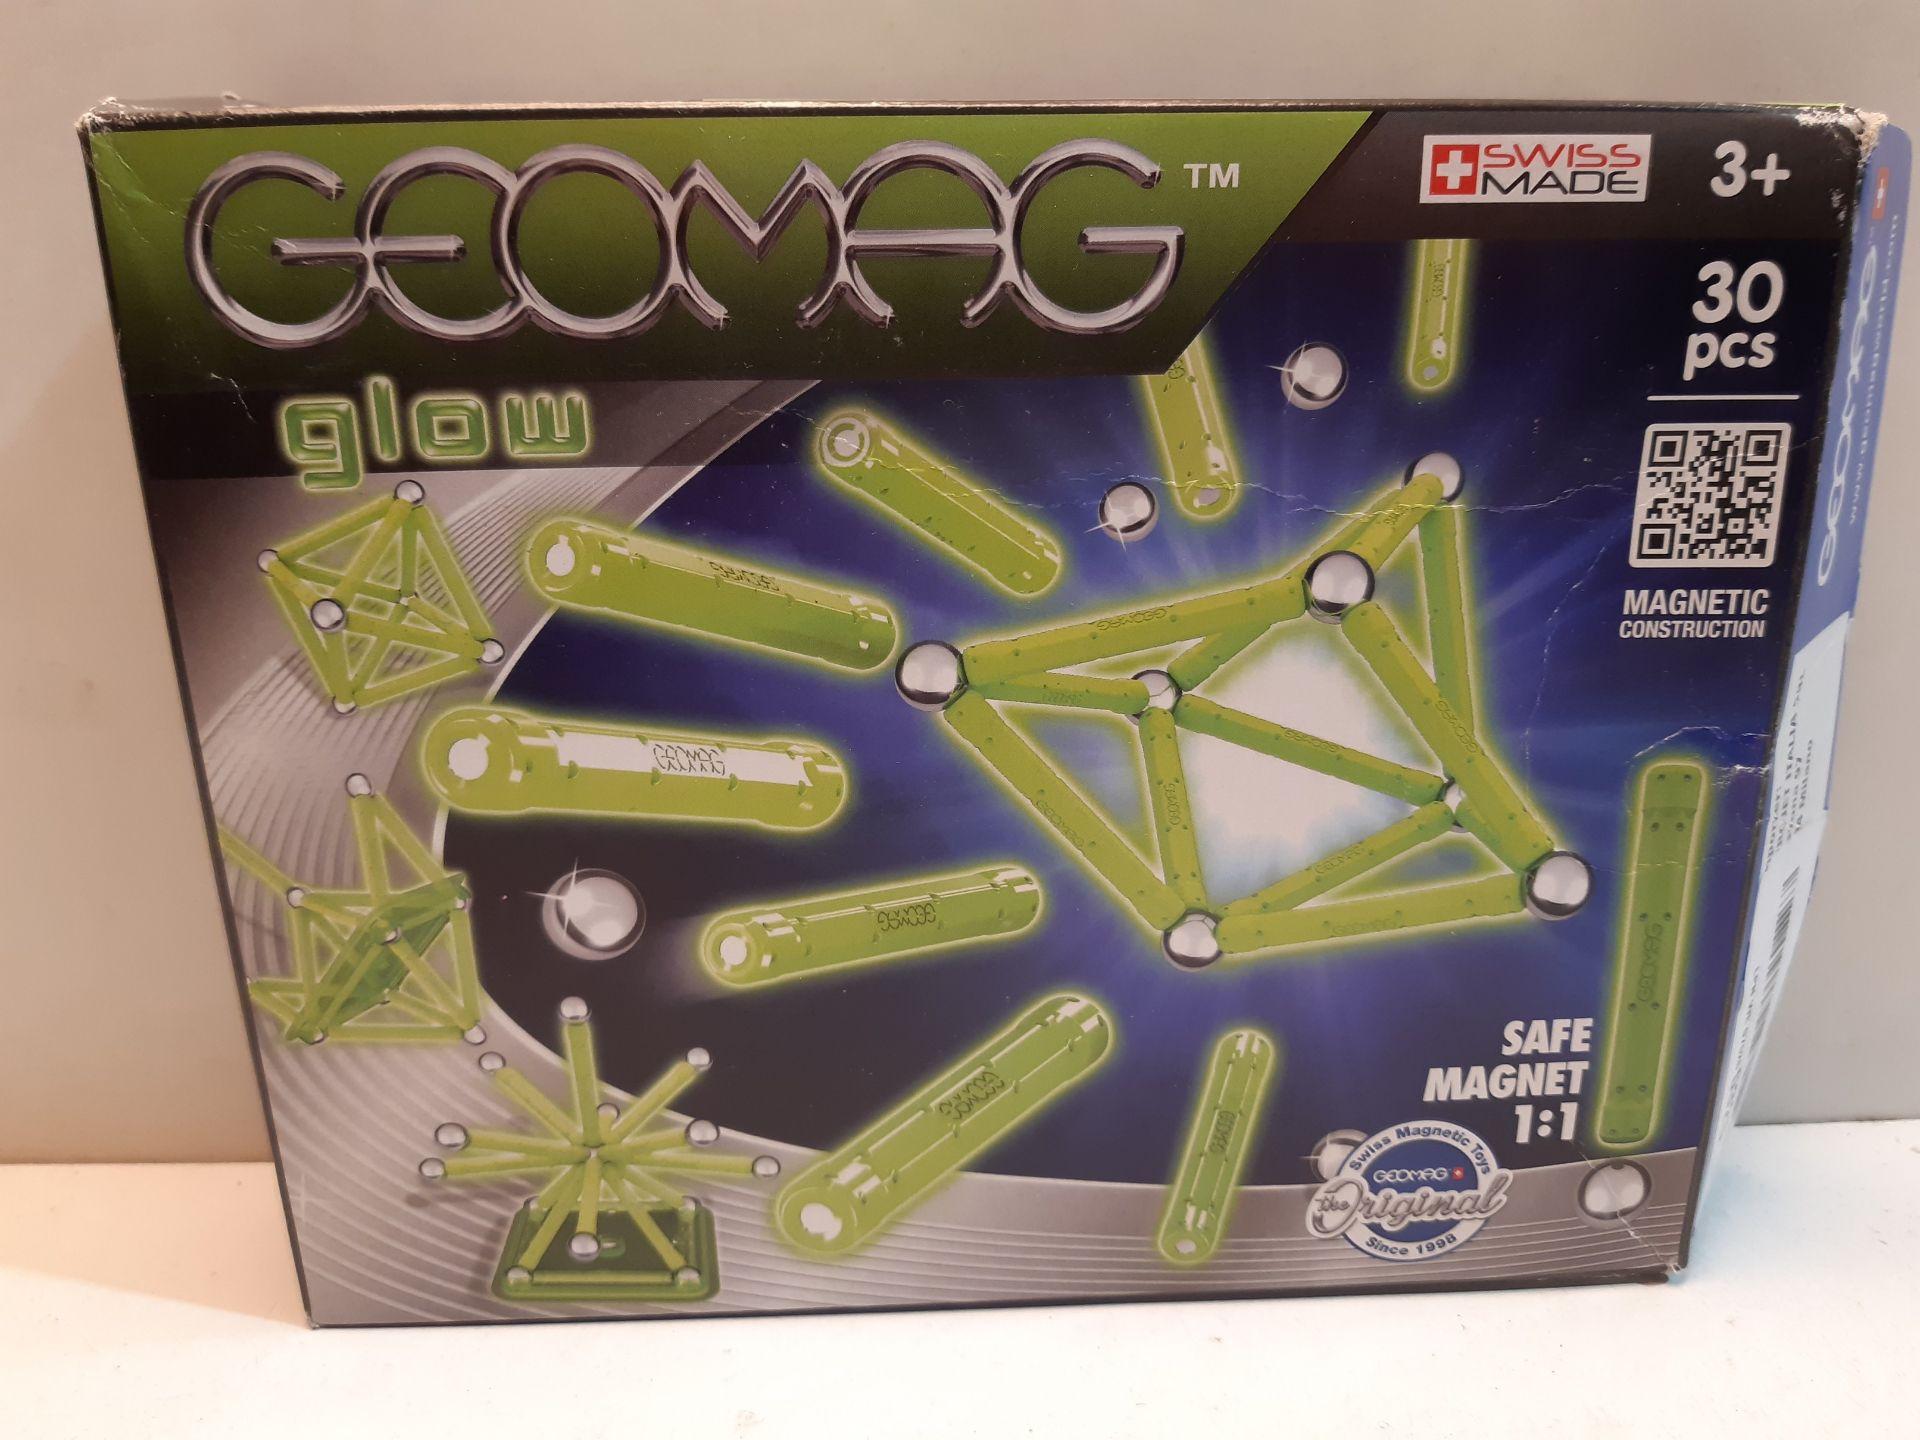 RRP £15.79 Geomag Classic Glow 335 - Image 2 of 2